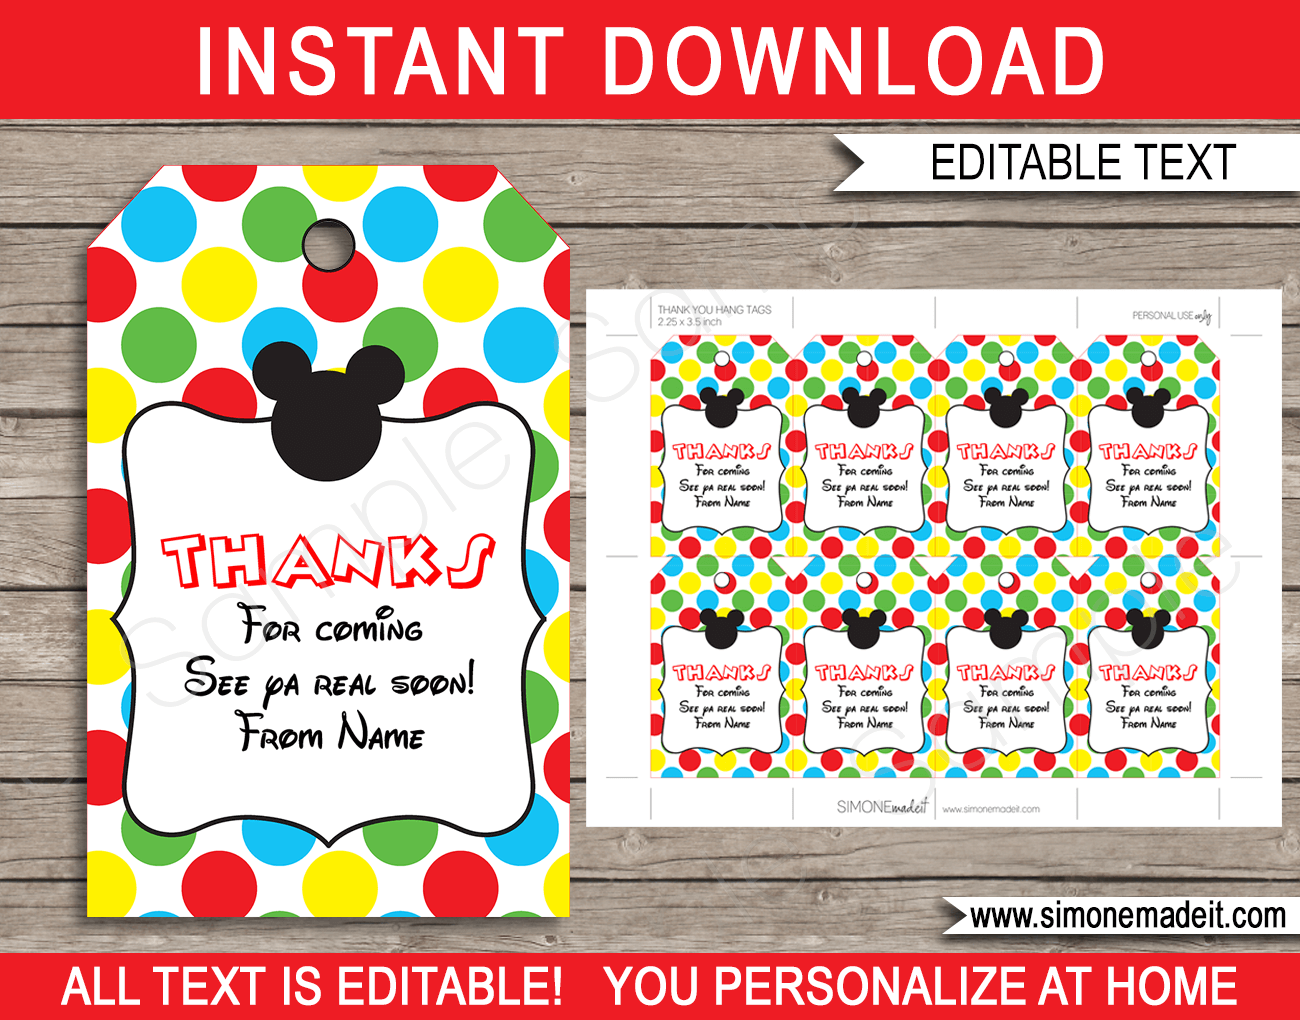 Mickey Mouse Party Favor Tags | Thank You Tags | Birthday Party | Editable DIY Template | $3.00 INSTANT DOWNLOAD via SIMONEmadeit.com